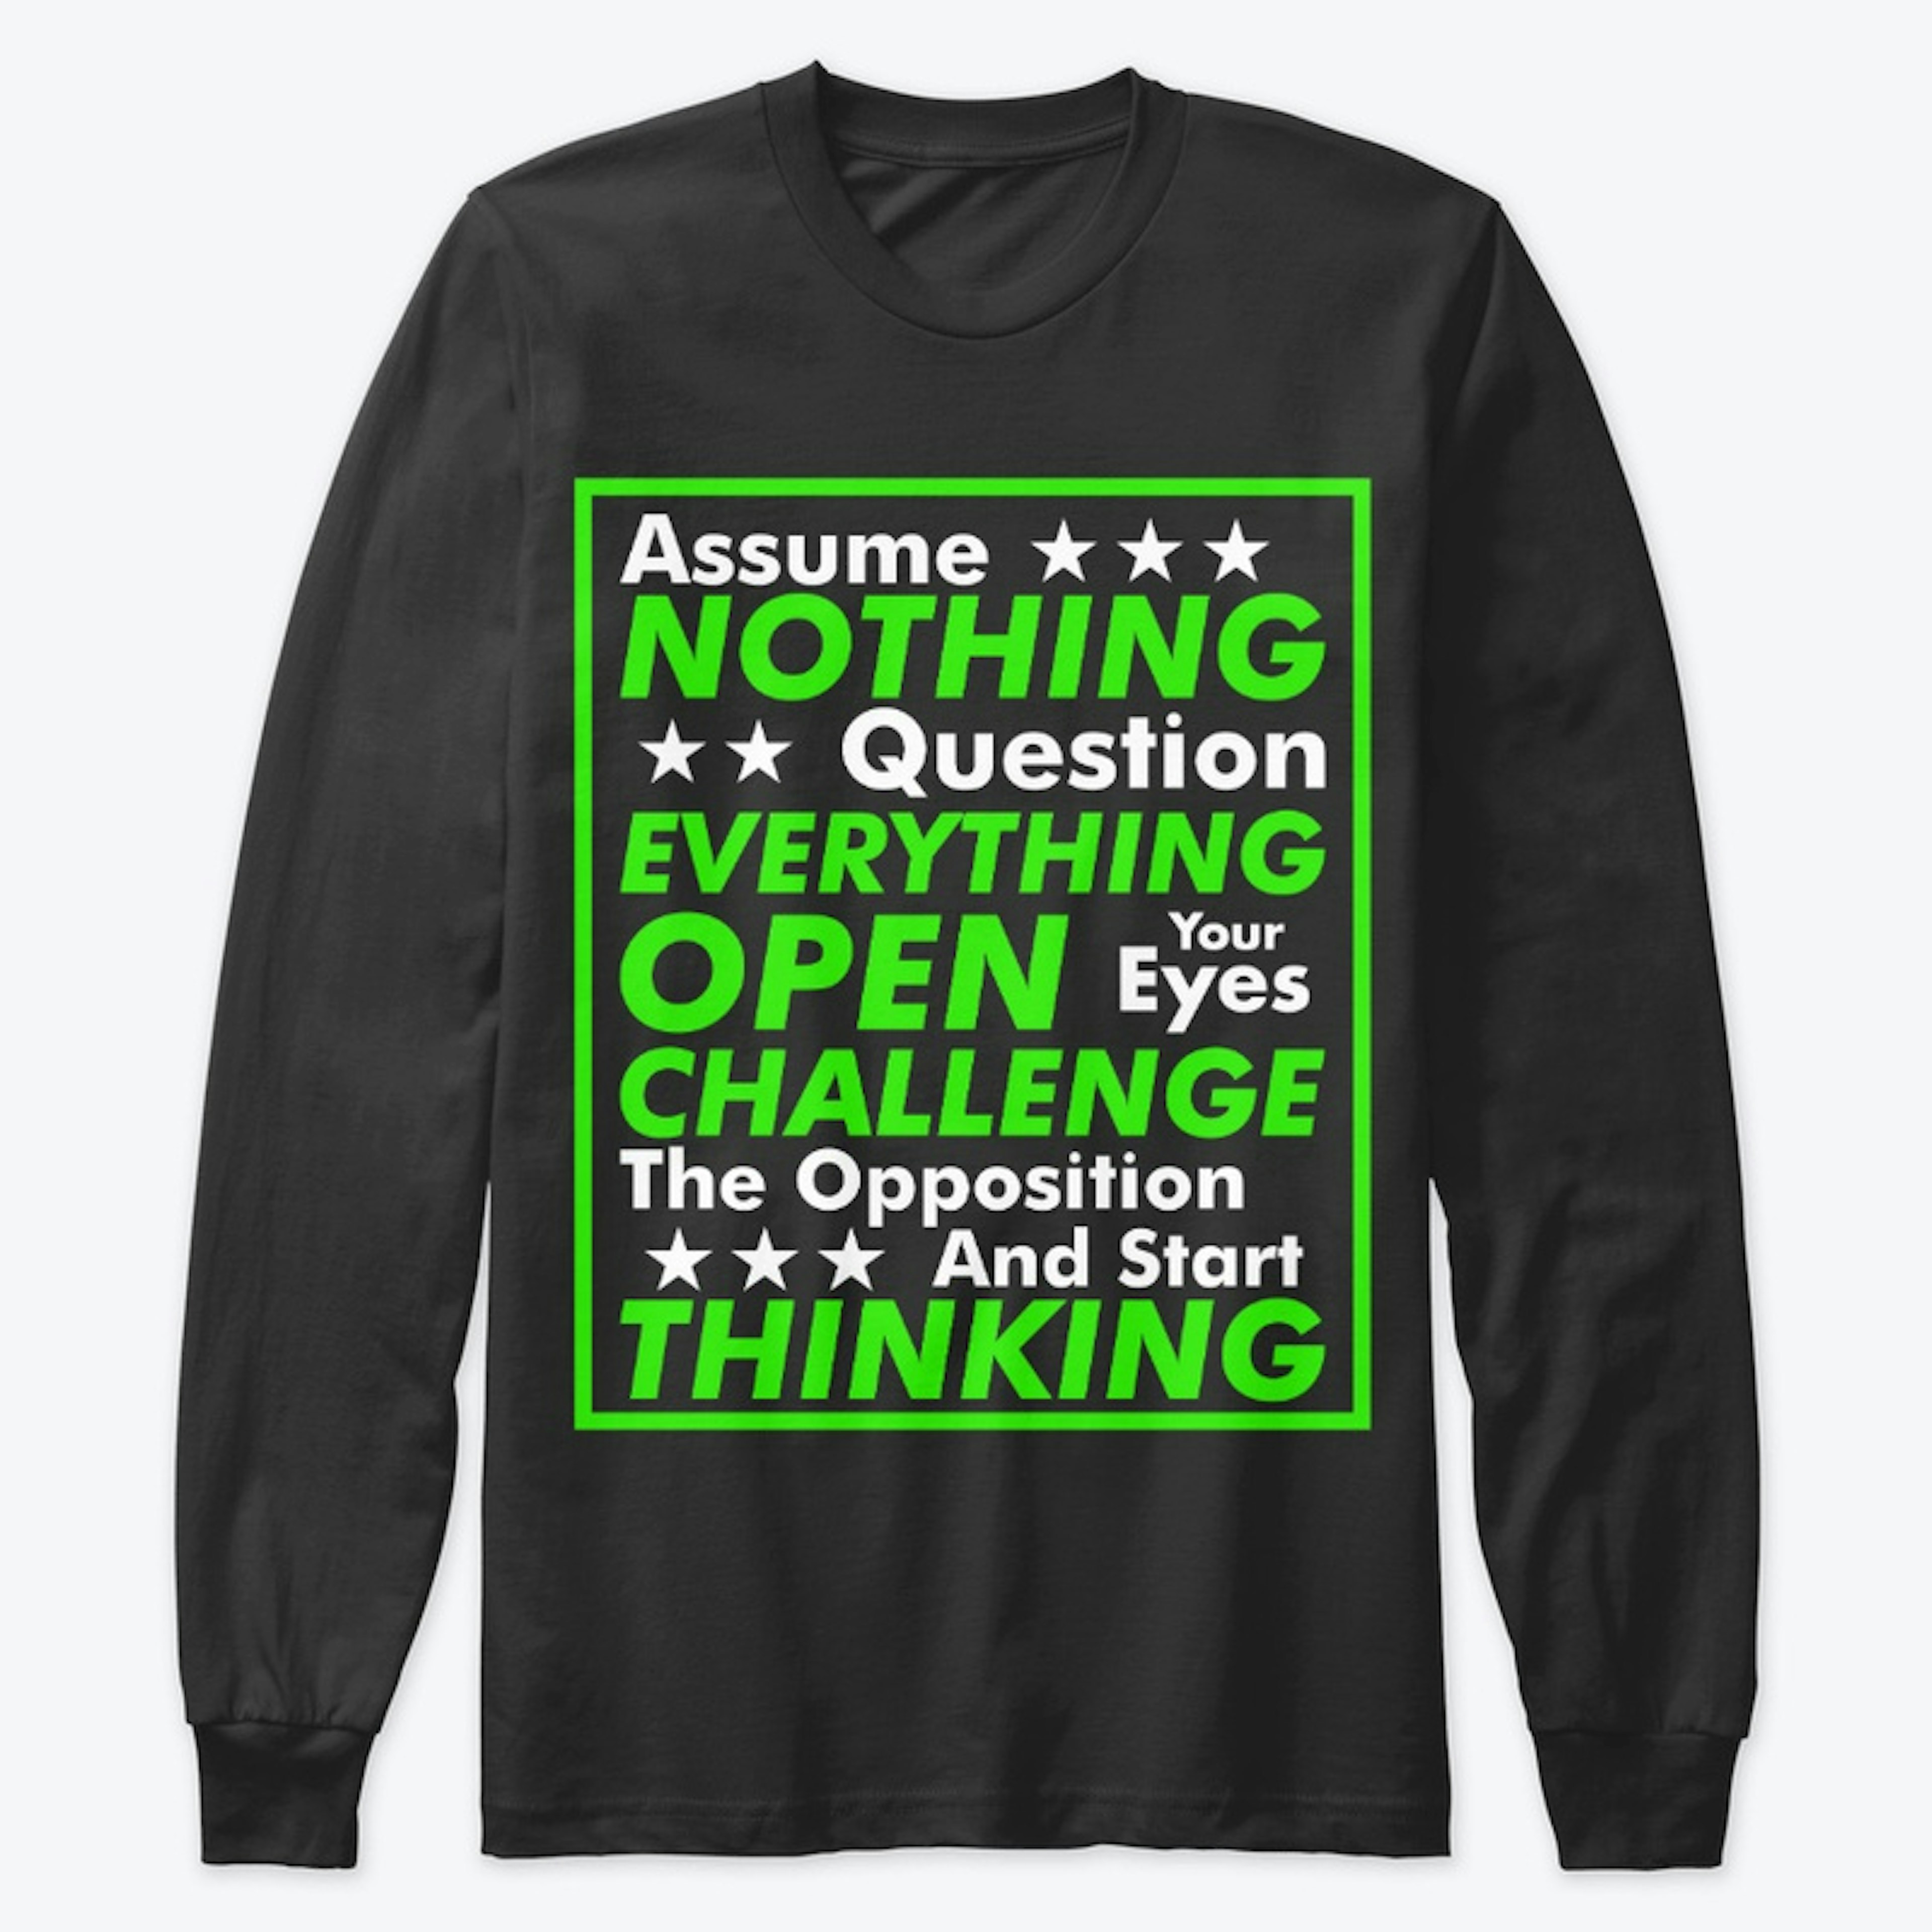 Assume Nothing, Question Everything